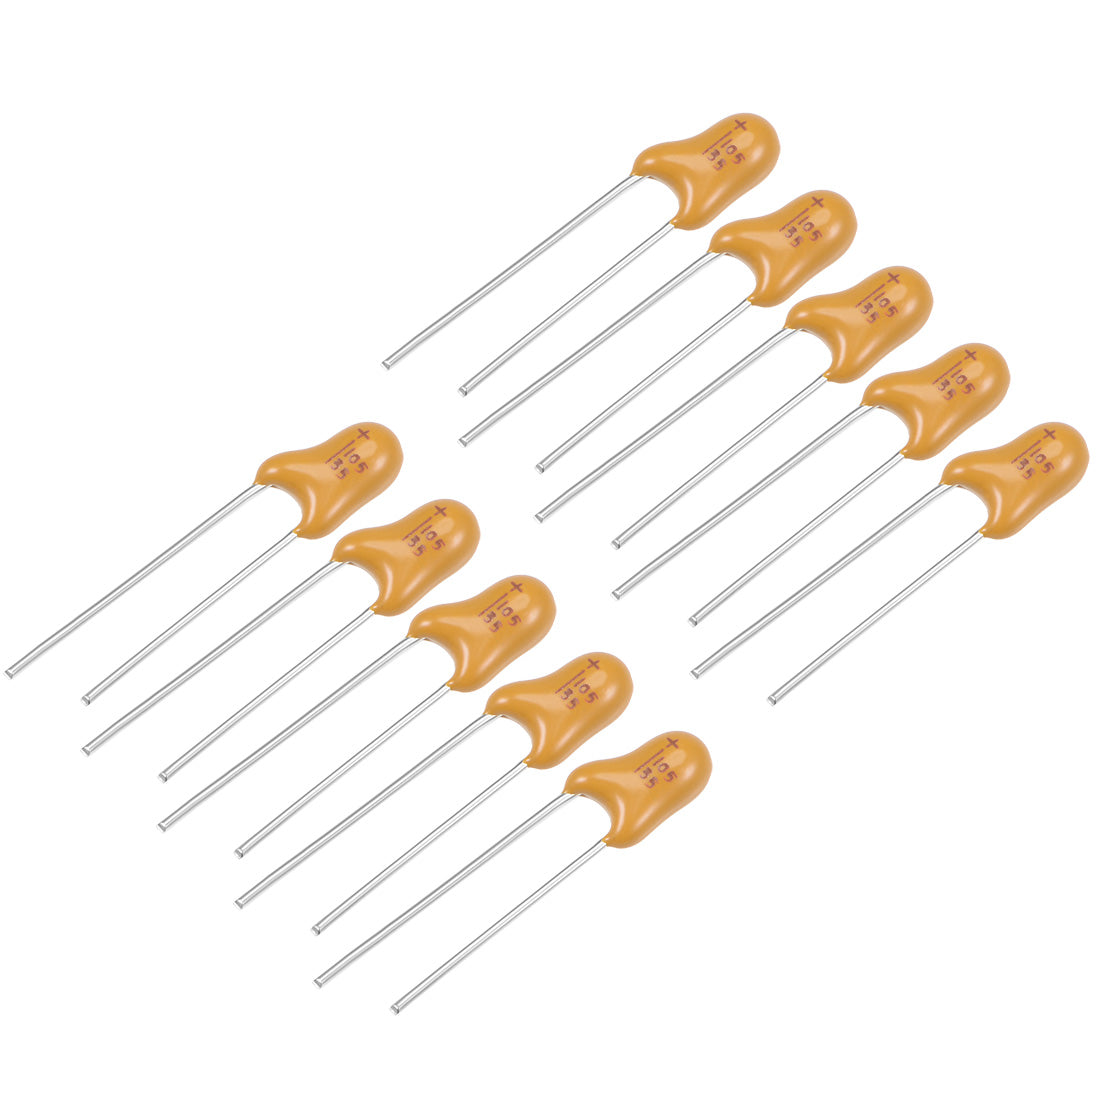 uxcell Uxcell 1uF Tantalum Capacitor, 35V 2 Pin Yellow Radial Electrolytic Capacitor Dipped Tantalum Bead Capacitors 10pcs